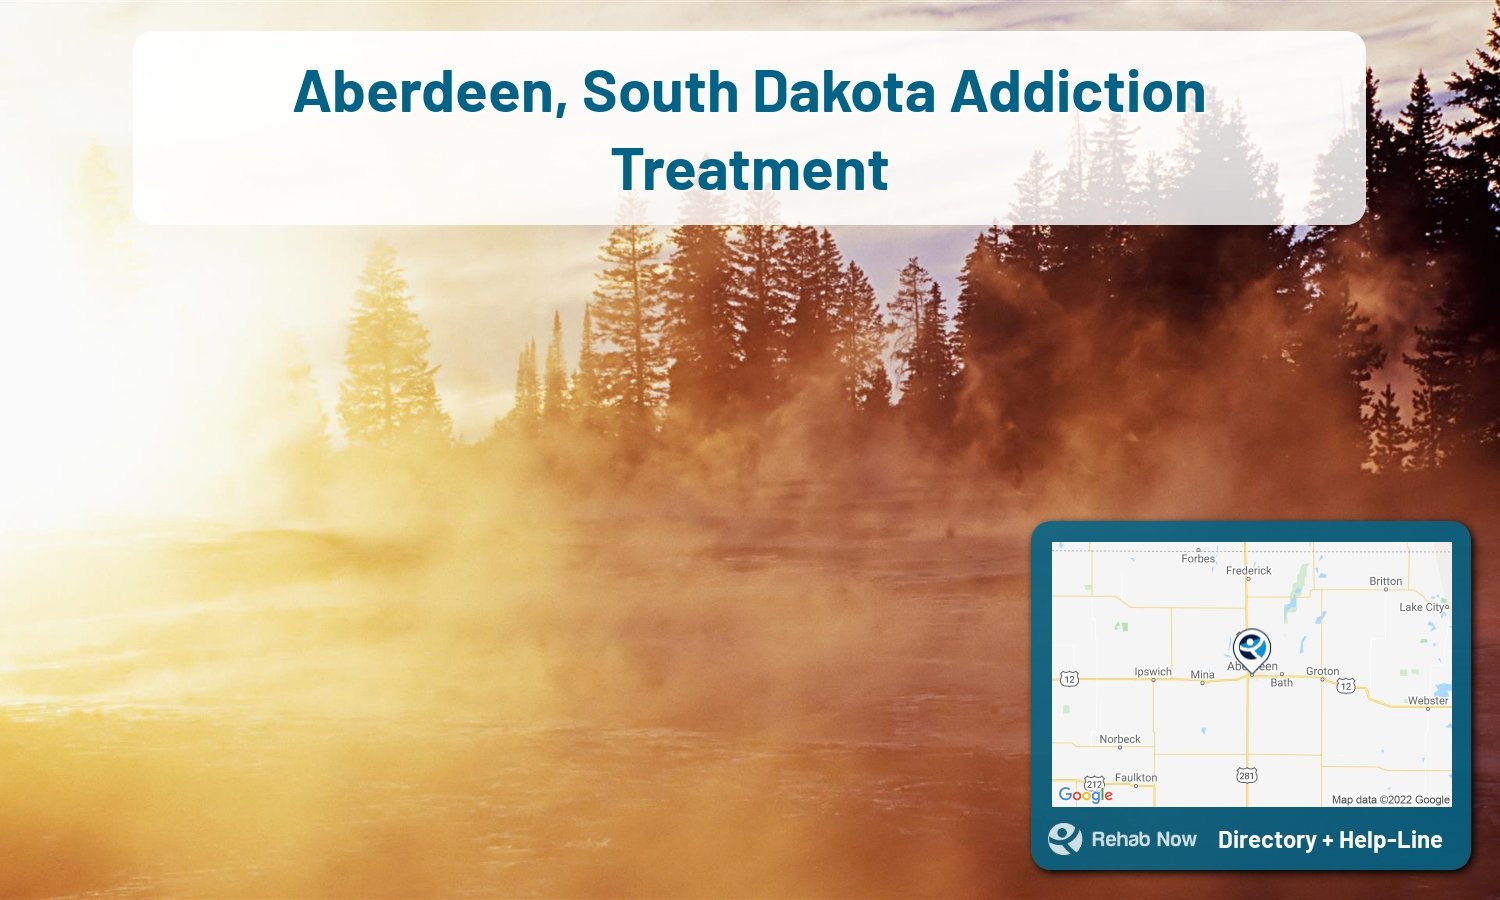 Aberdeen, SD Treatment Centers. Find drug rehab in Aberdeen, South Dakota, or detox and treatment programs. Get the right help now!